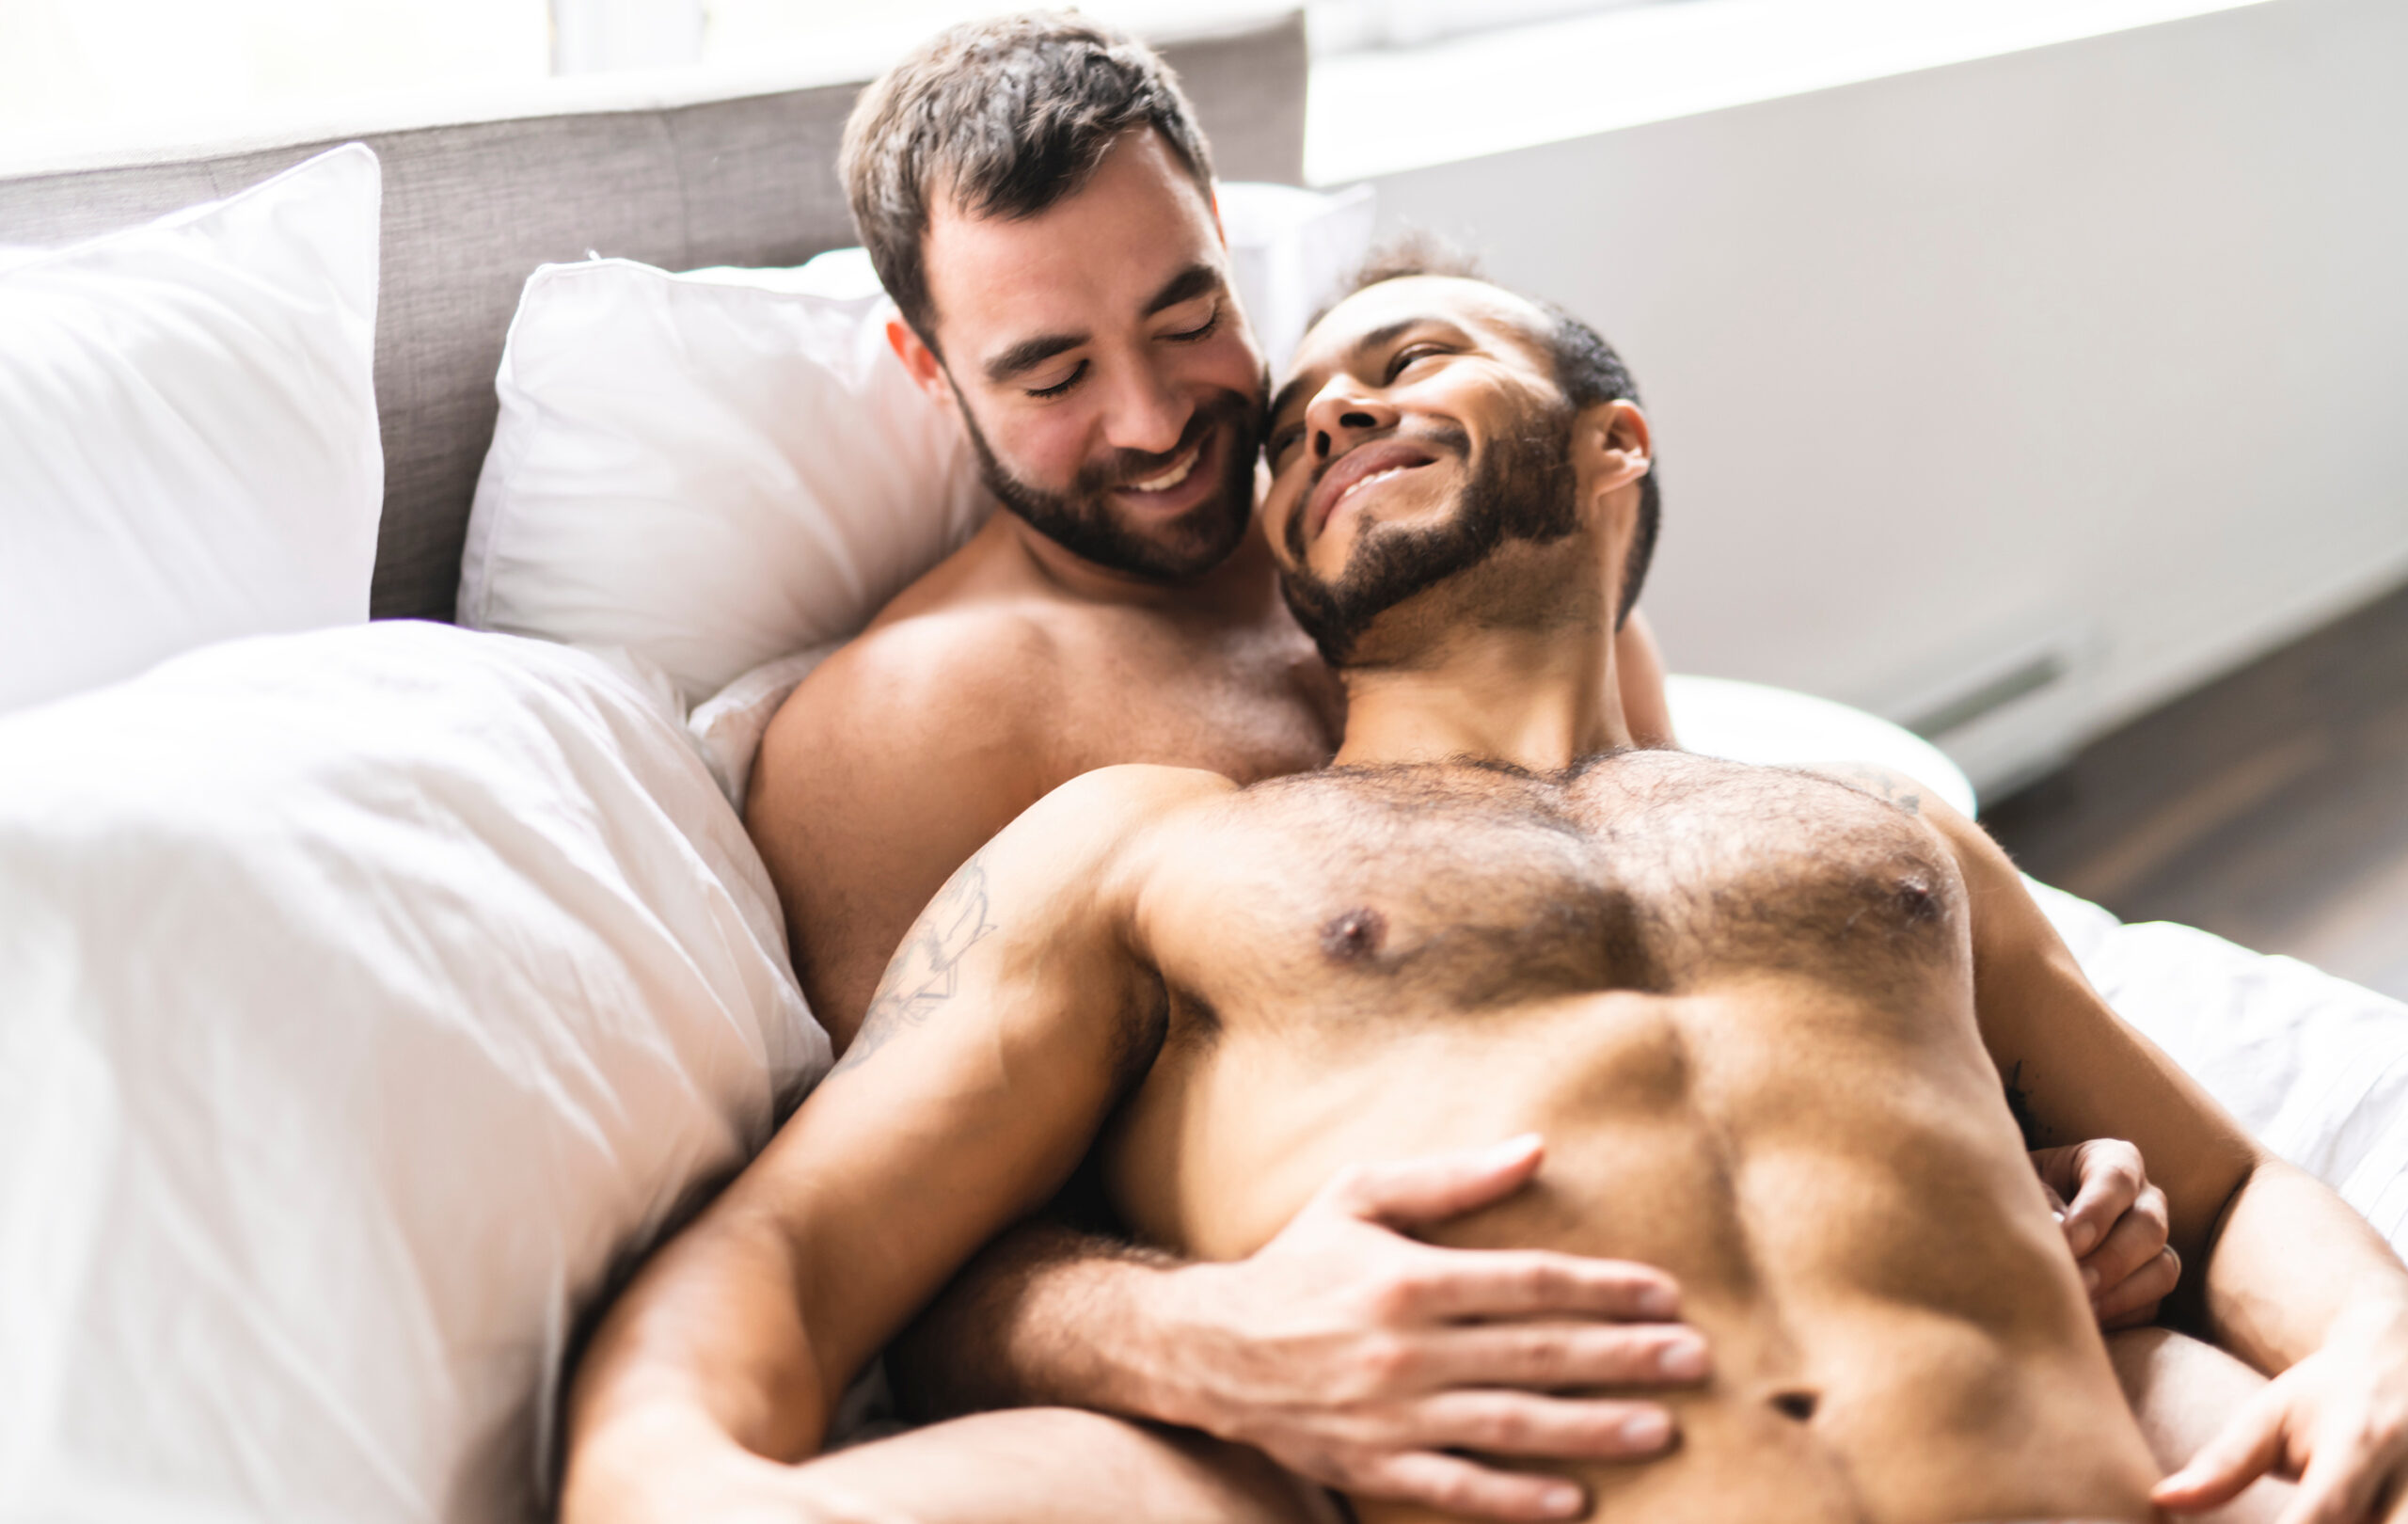 Five Things That Happen After You Have Gay Sex